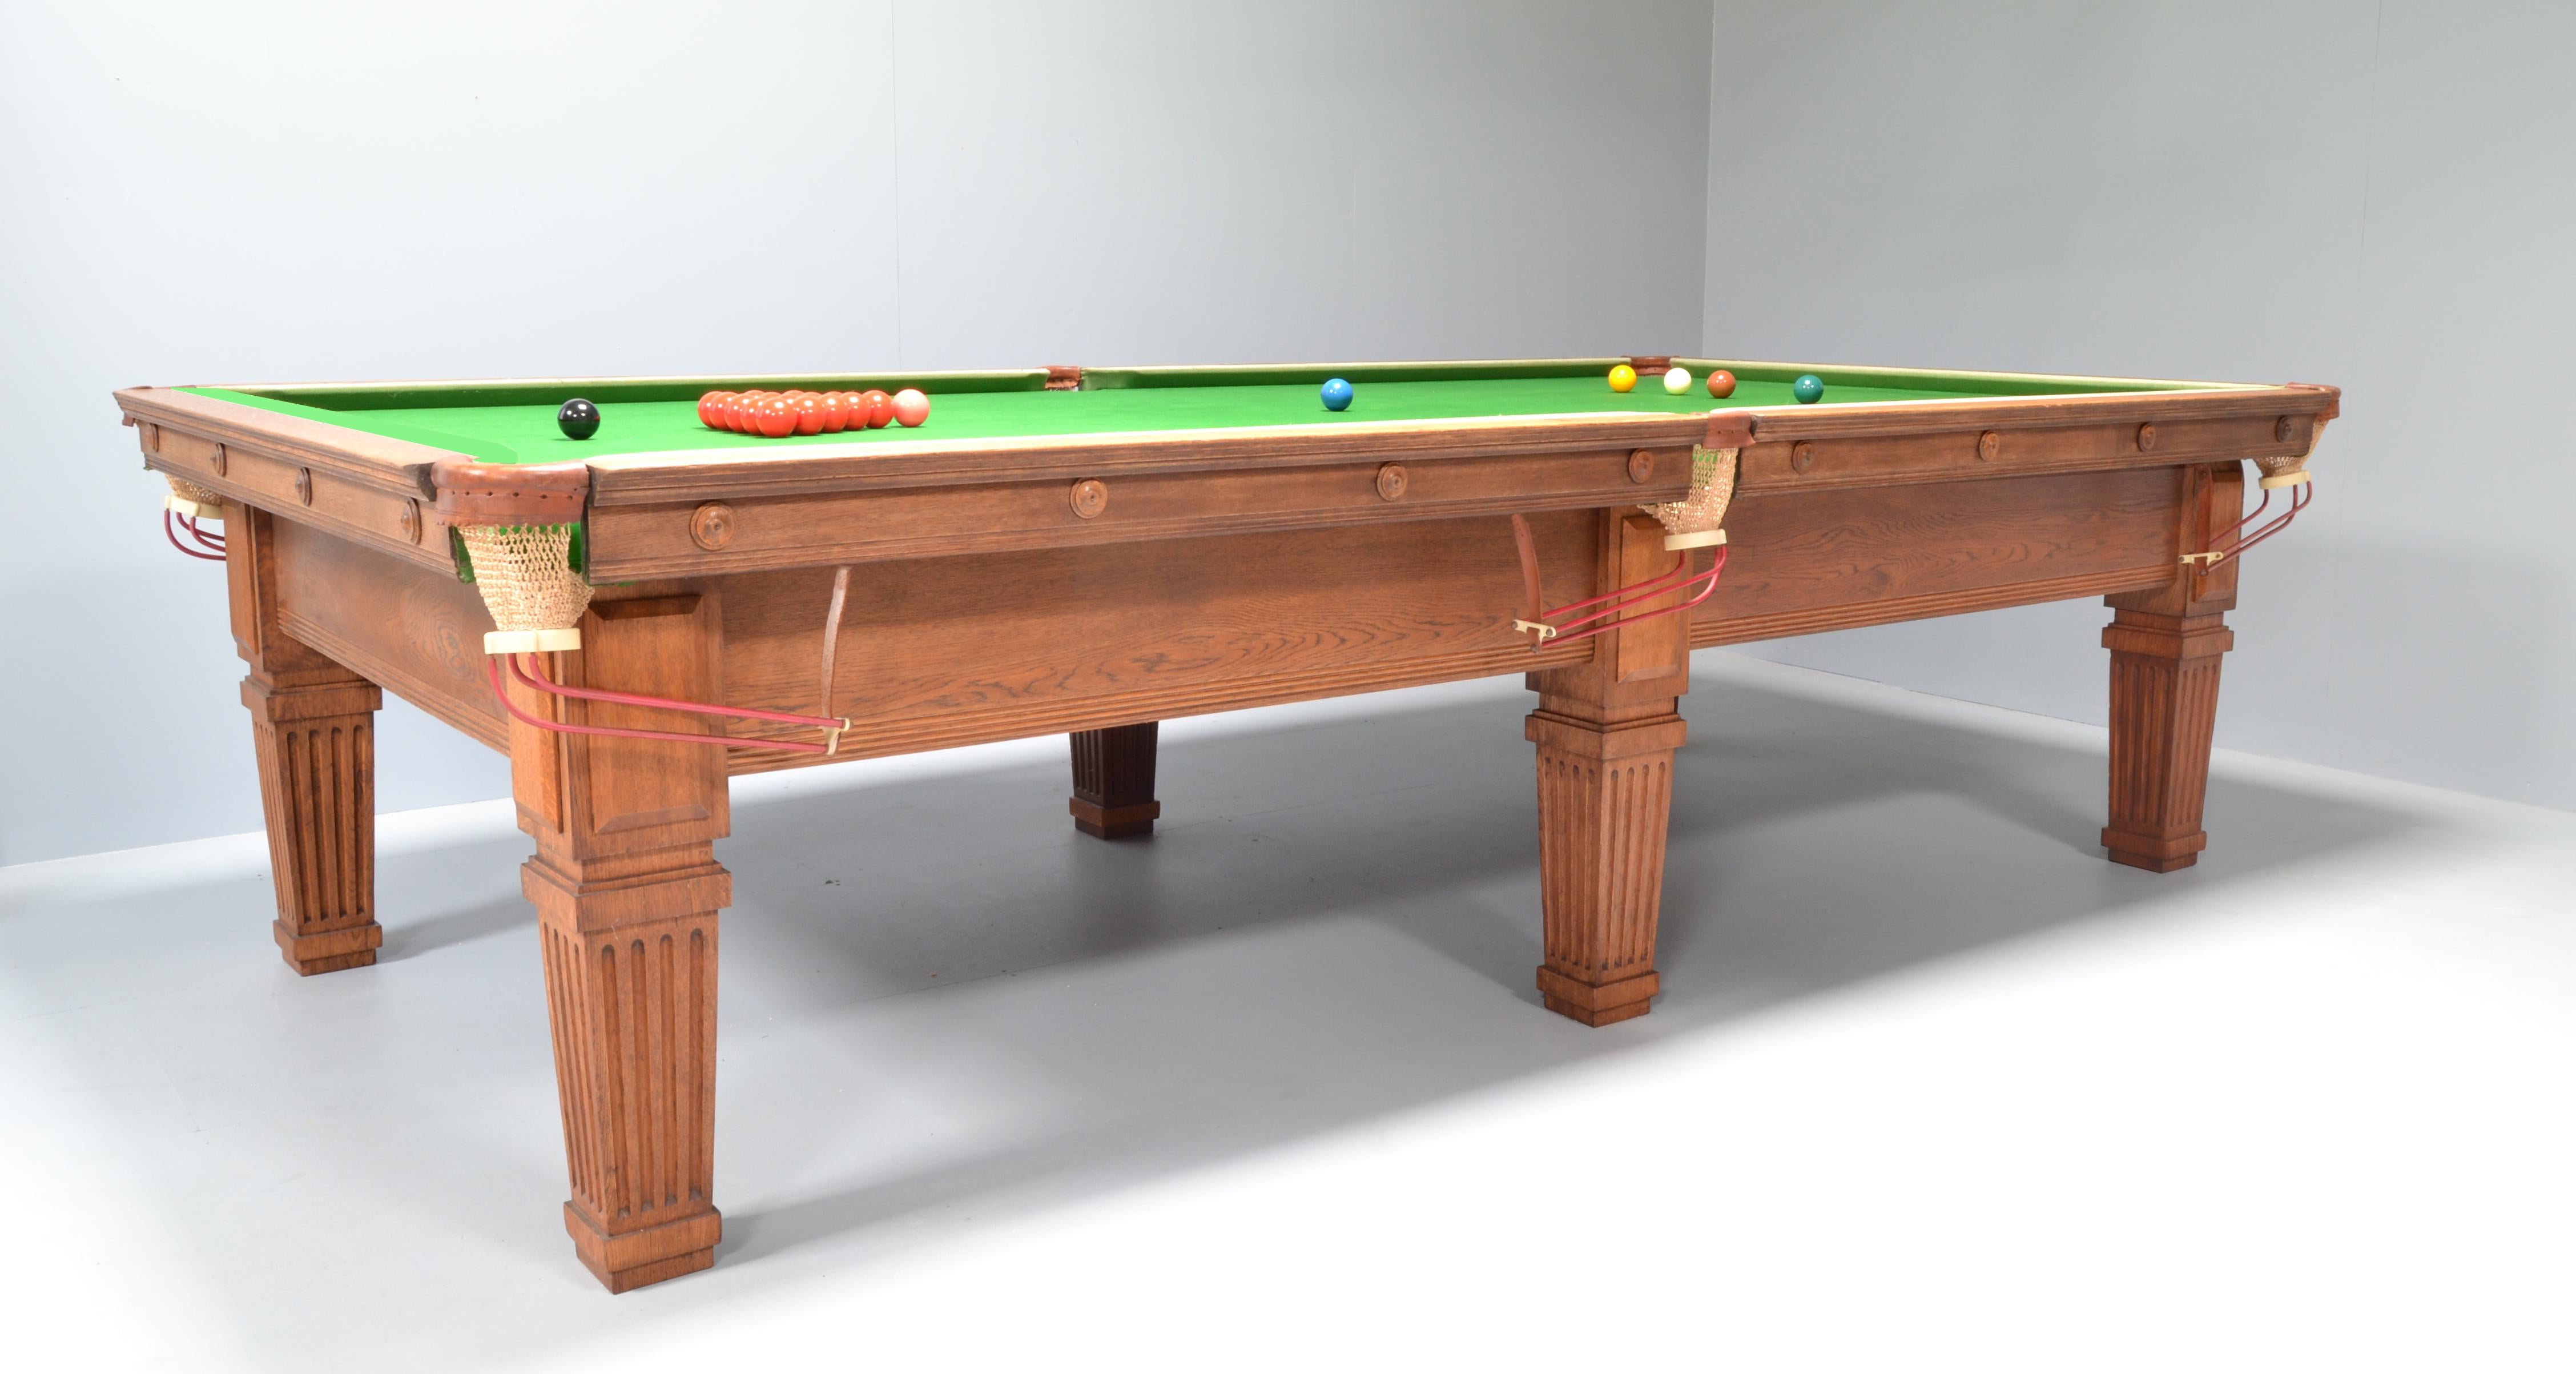 An attractive and very well made solid oak antique billiard or snooker table by Thurston of London circa 1910, standing on six tapering fluted or scalloped legs with applied rectangular cover panels, the cushions with applied decorative roundels.